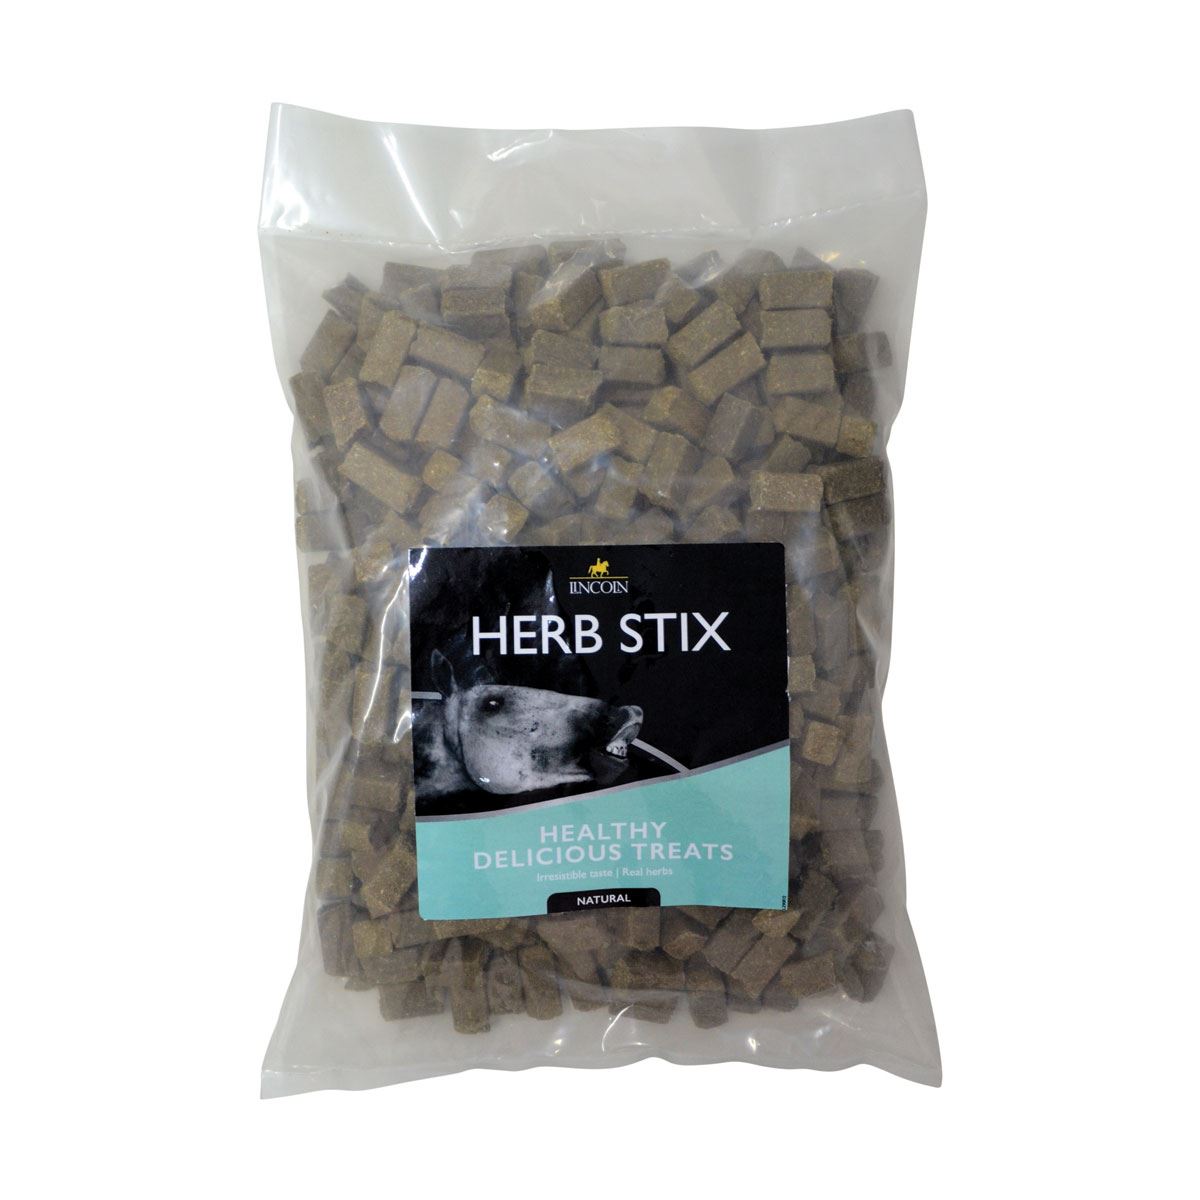 Lincoln Herb Stix with 7 herbs for health benefits